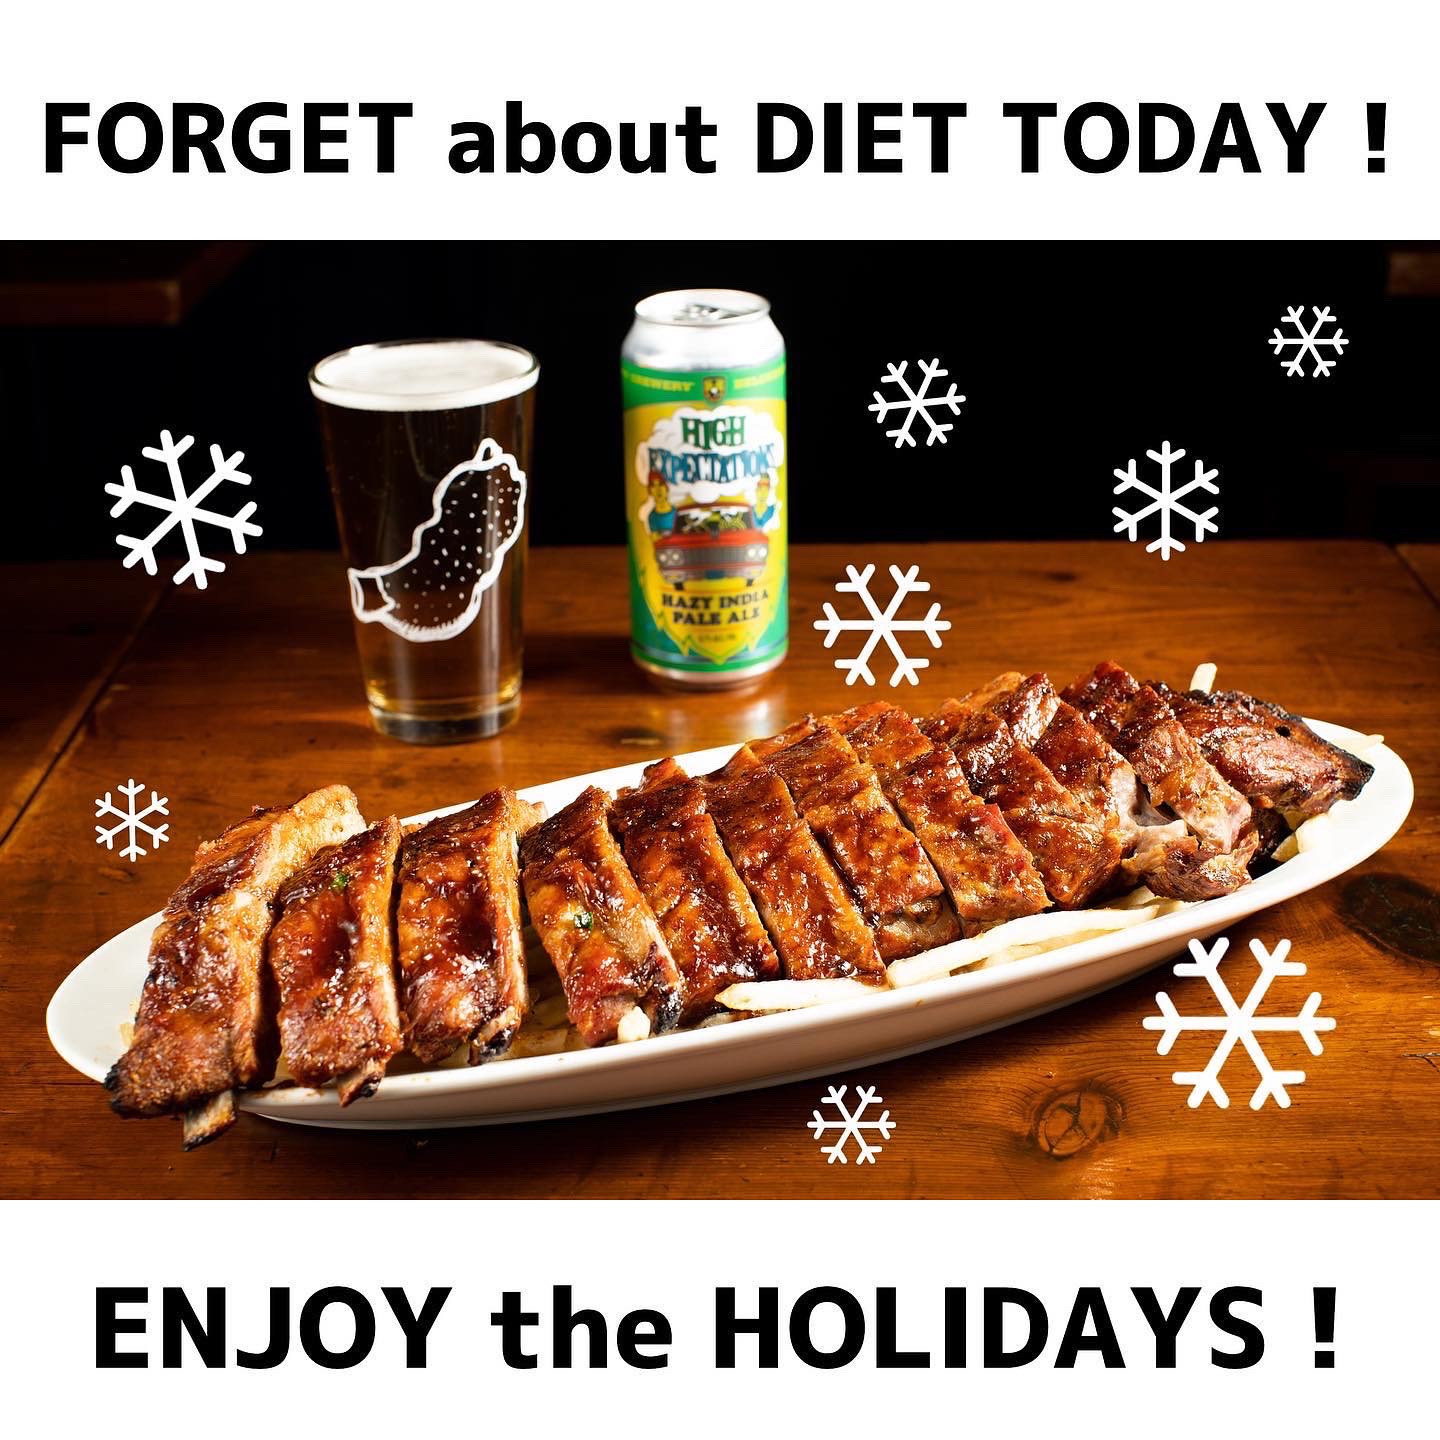 【FORGET about DIET TODAY ! ENJOY the HOLIDAYS !】